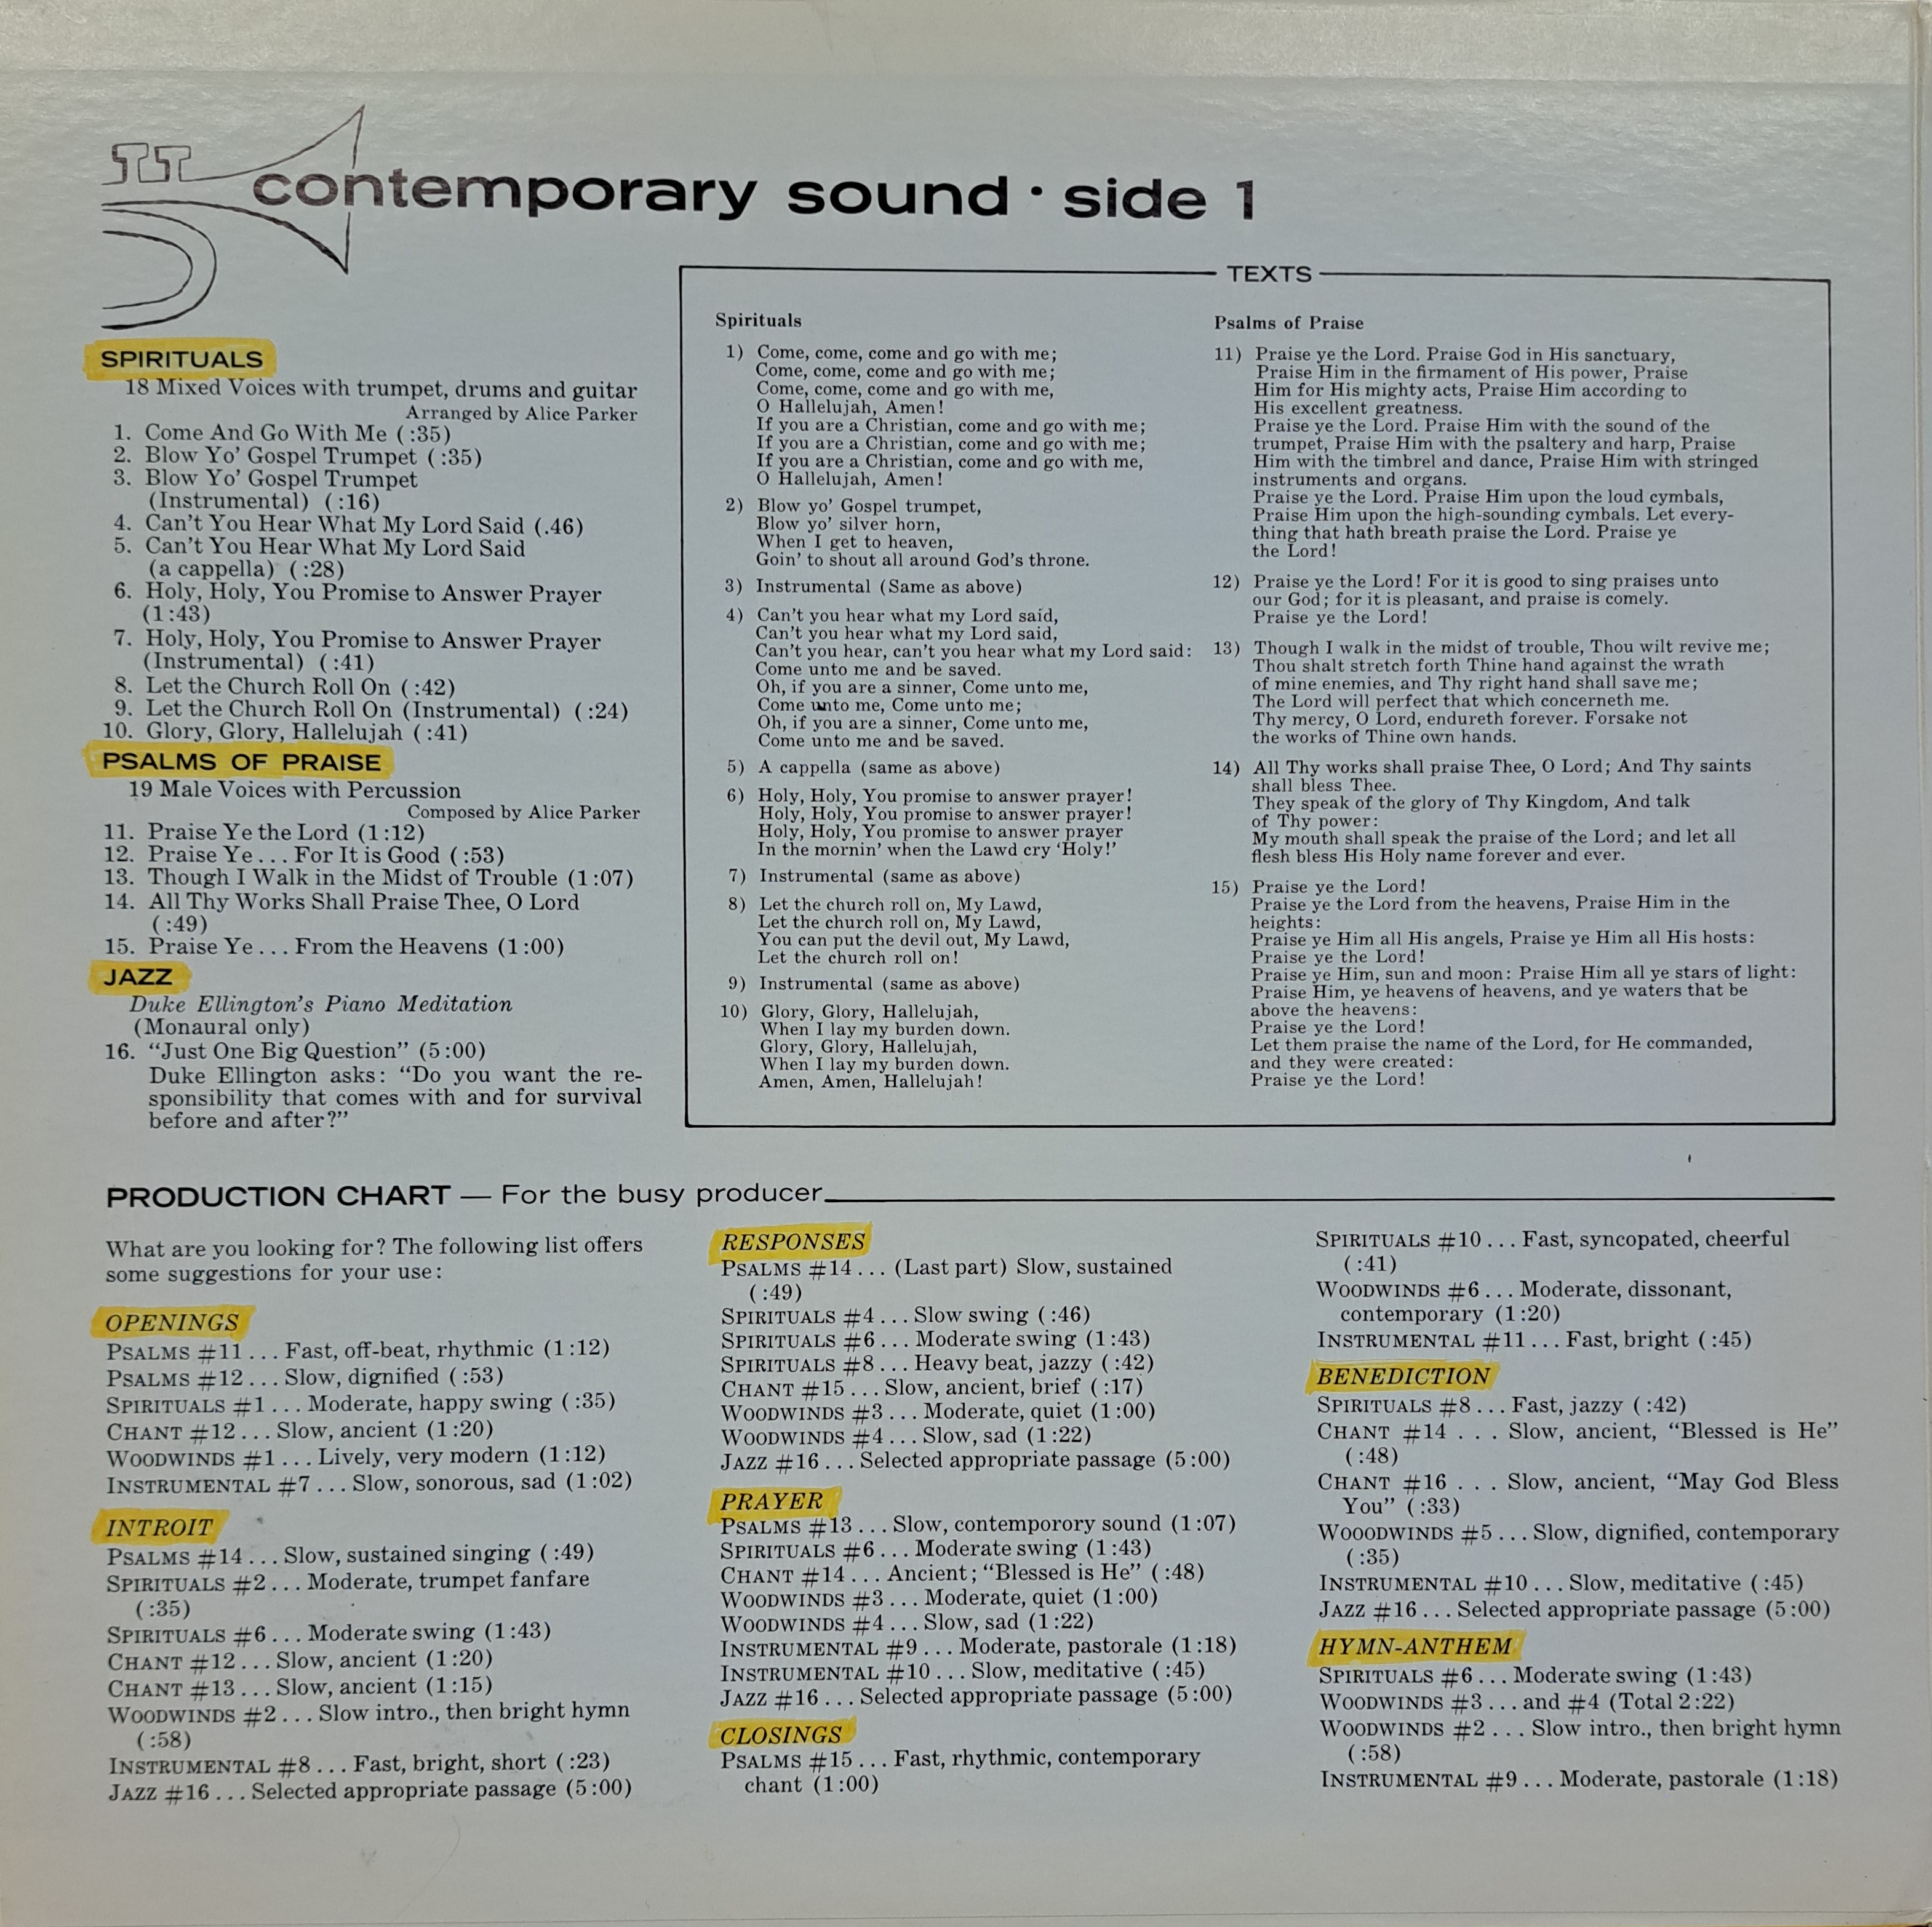 Contemporary sound: album II, music production aids for religious broadcasting, before 1968, side 2